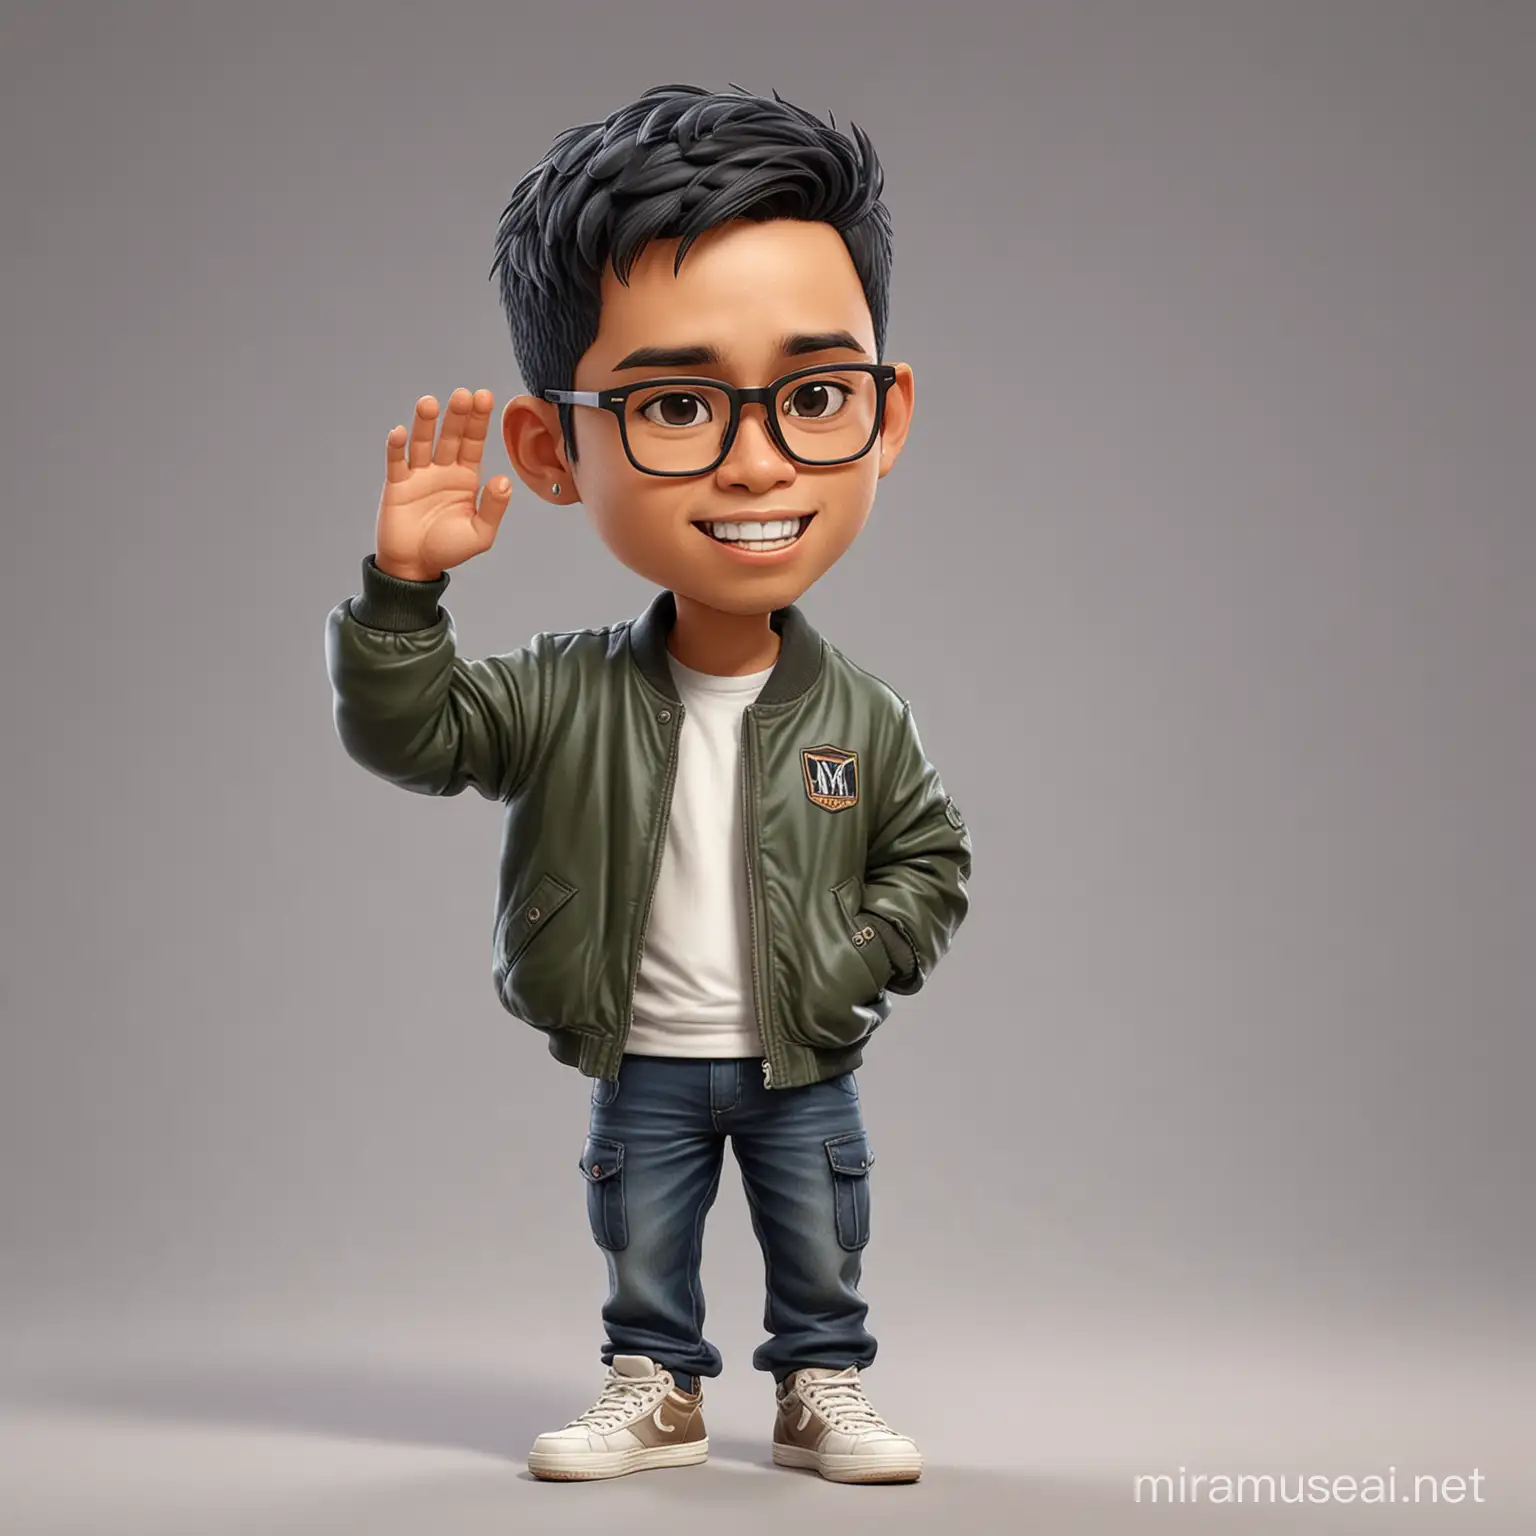 Chibi caricature medium potrait, A 29 year old Indonesian man, short thin hair, big head, wearing glasses, wearing a varsity jacket, cargo pants, is placing his right hand on his forehead as if looking for or looking at something, realistic.